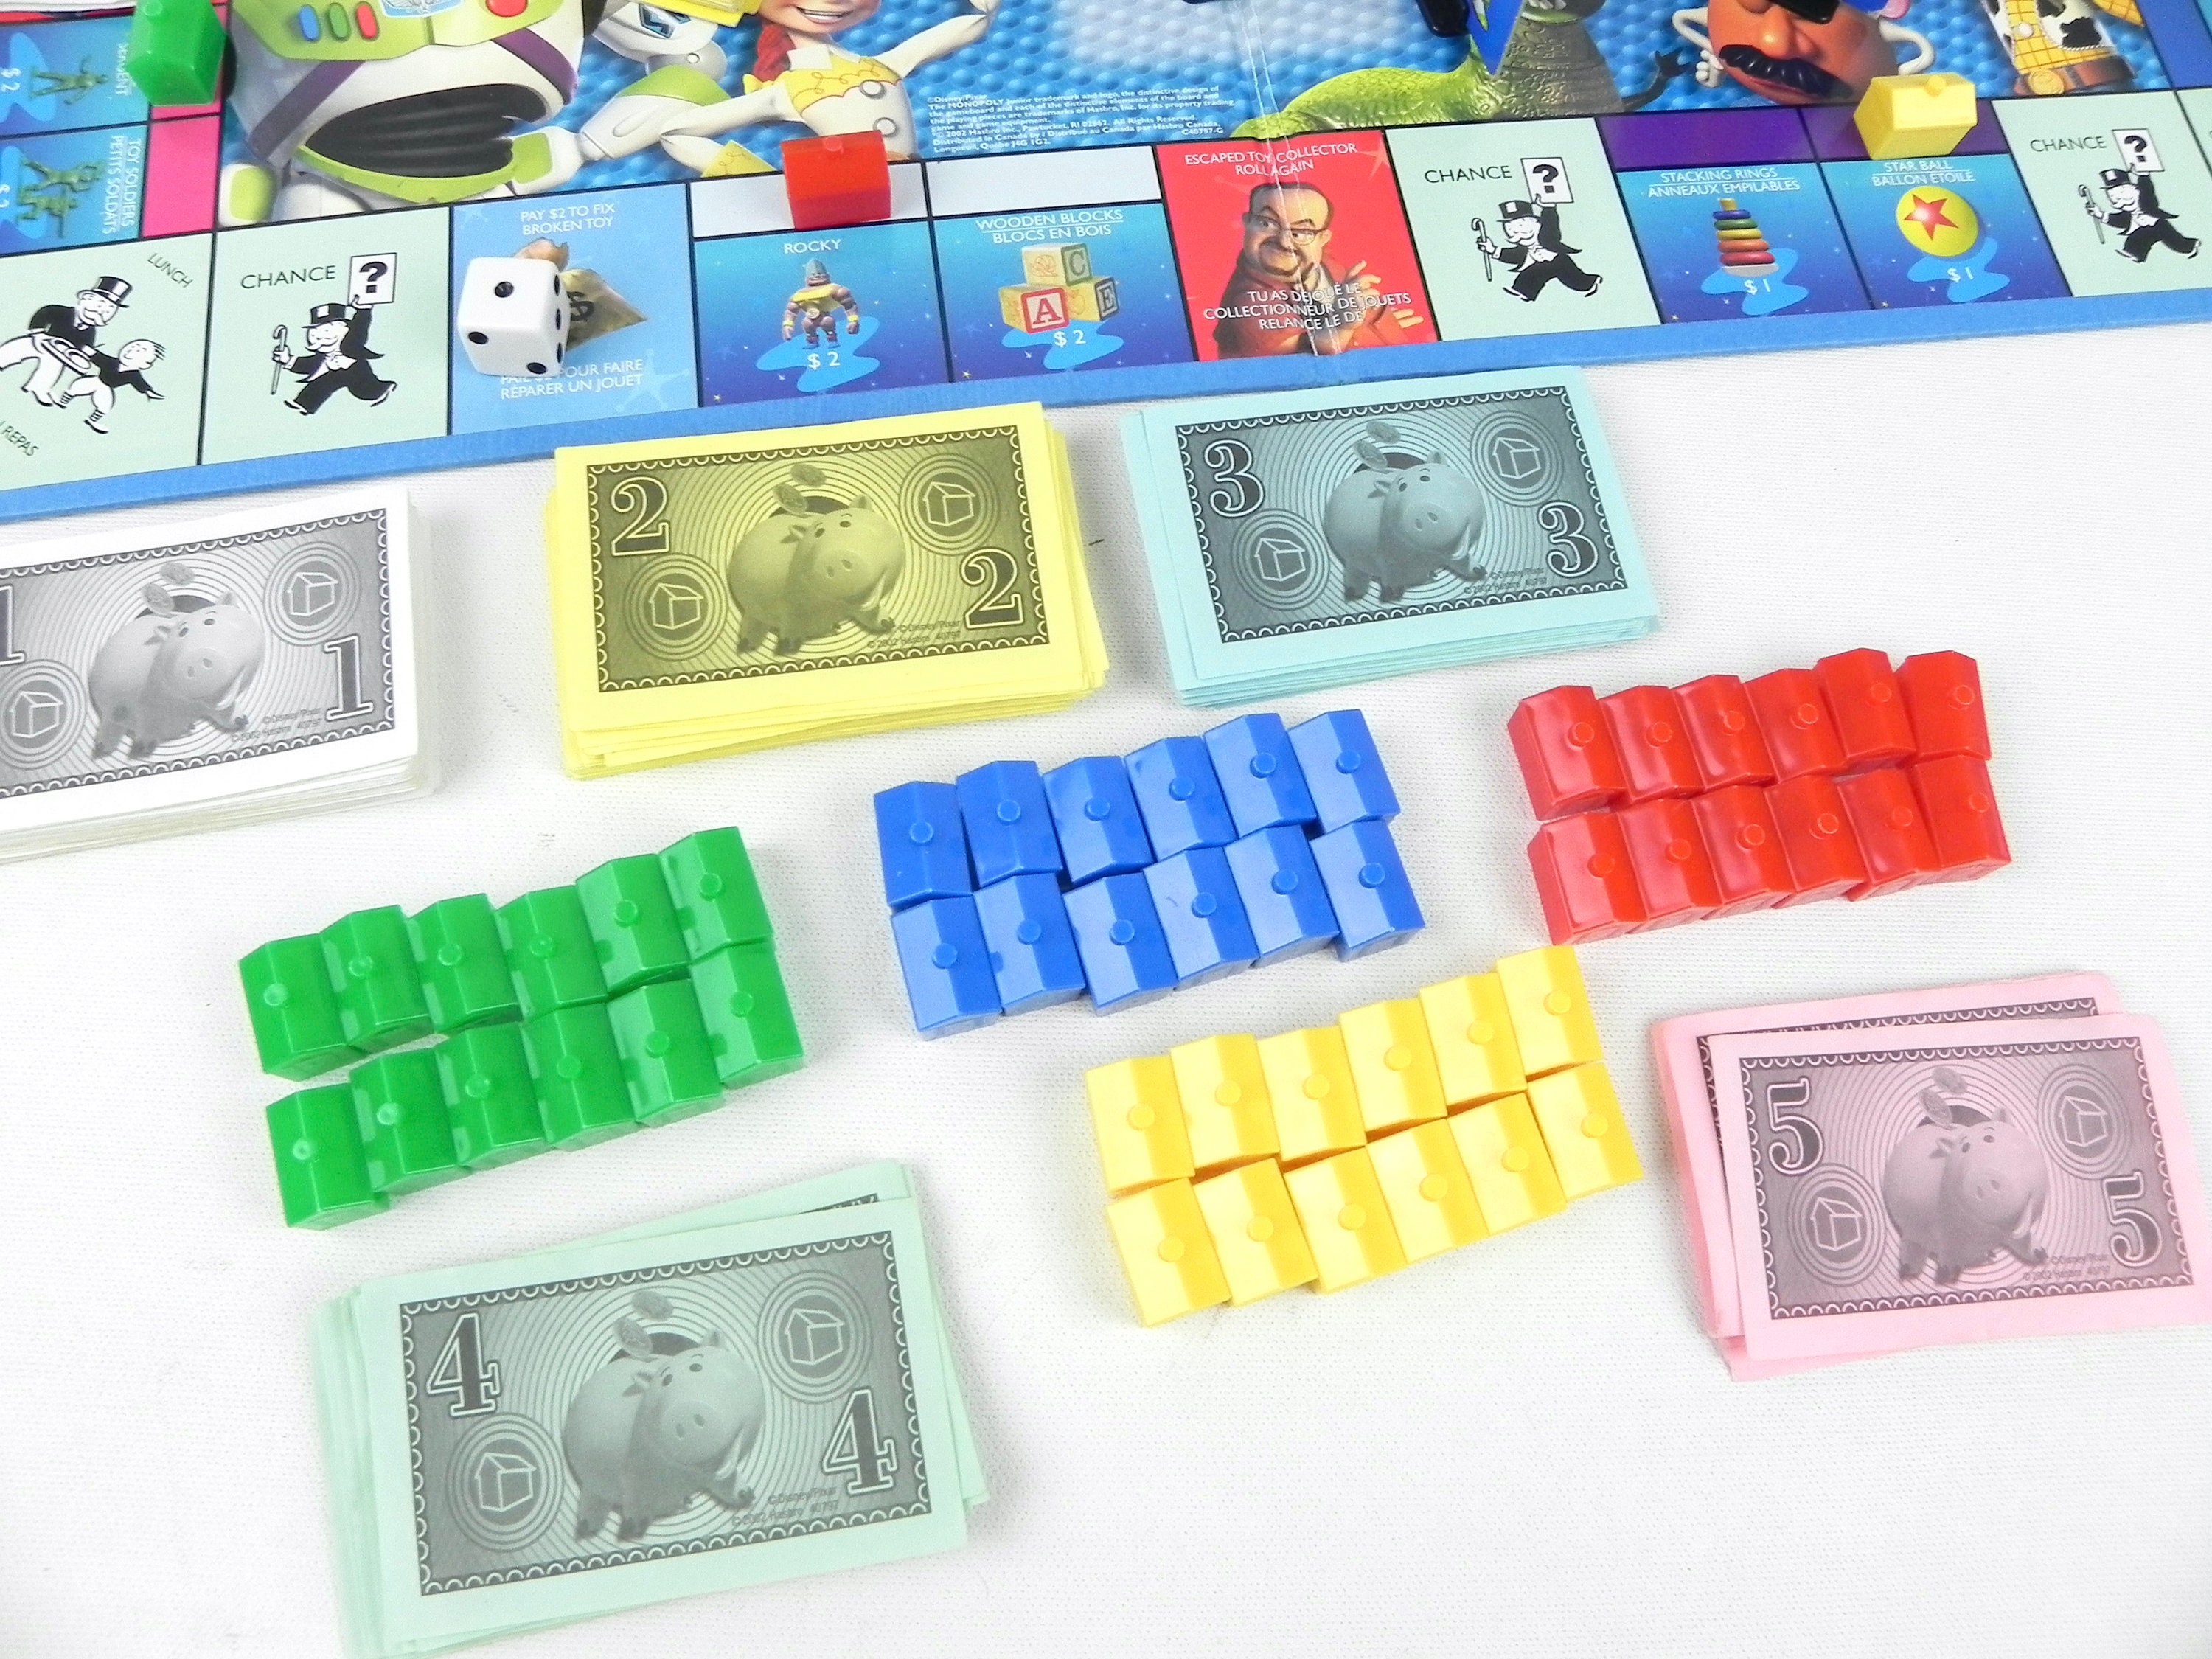 Toy Story Monopoly Game - Fun for the Whole Family